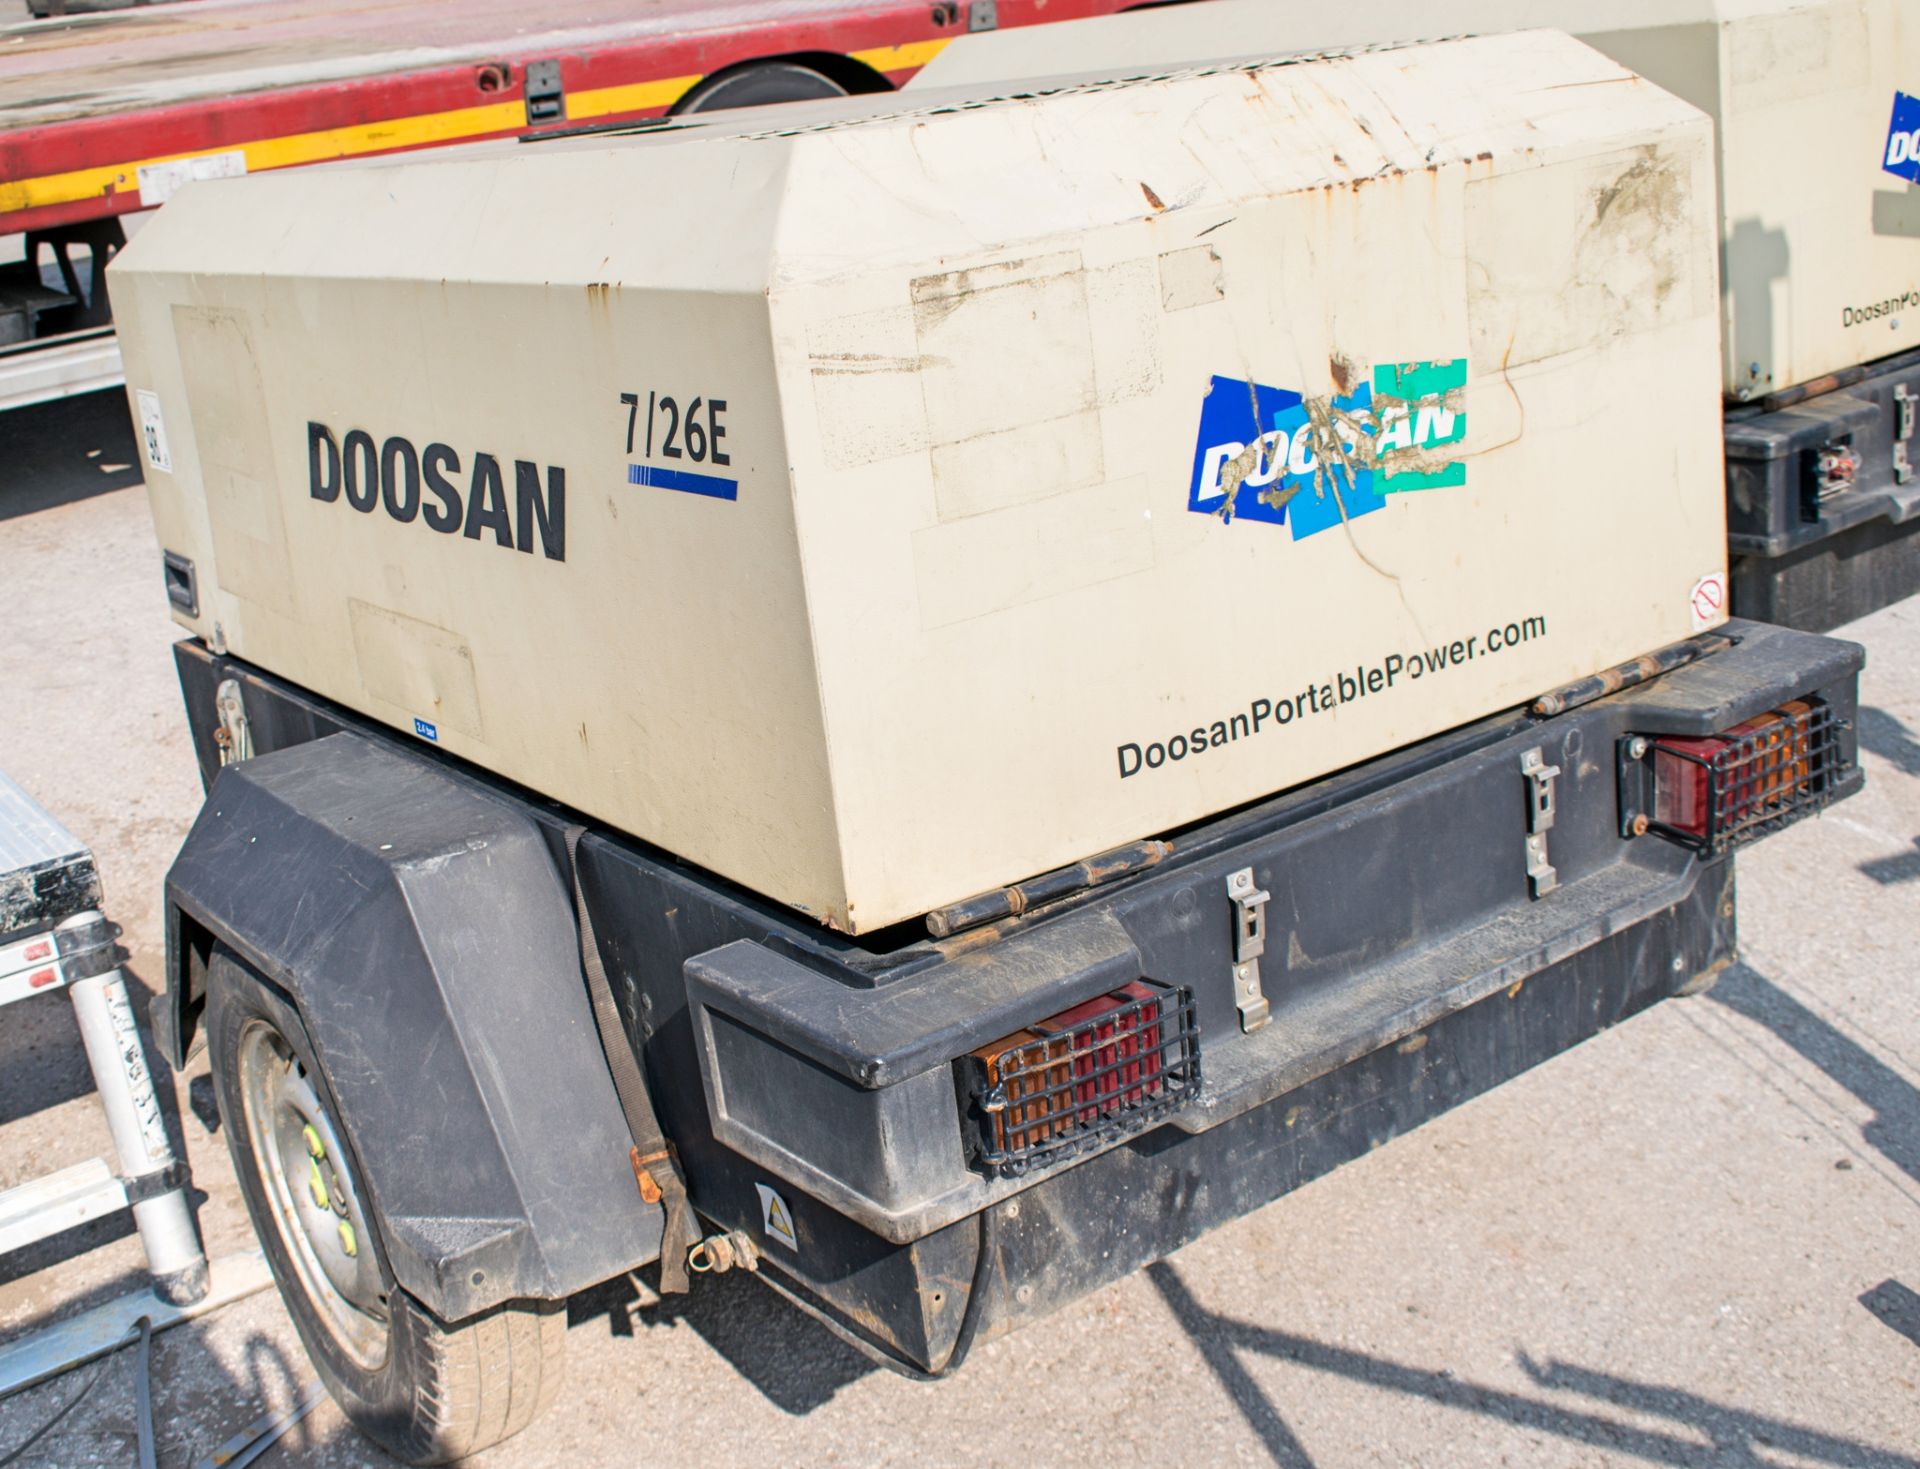 Doosan 726E diesel driven mobile air compressor/generator Year: 2012 S/N: 109270 Recorded Hours: 576 - Image 2 of 3